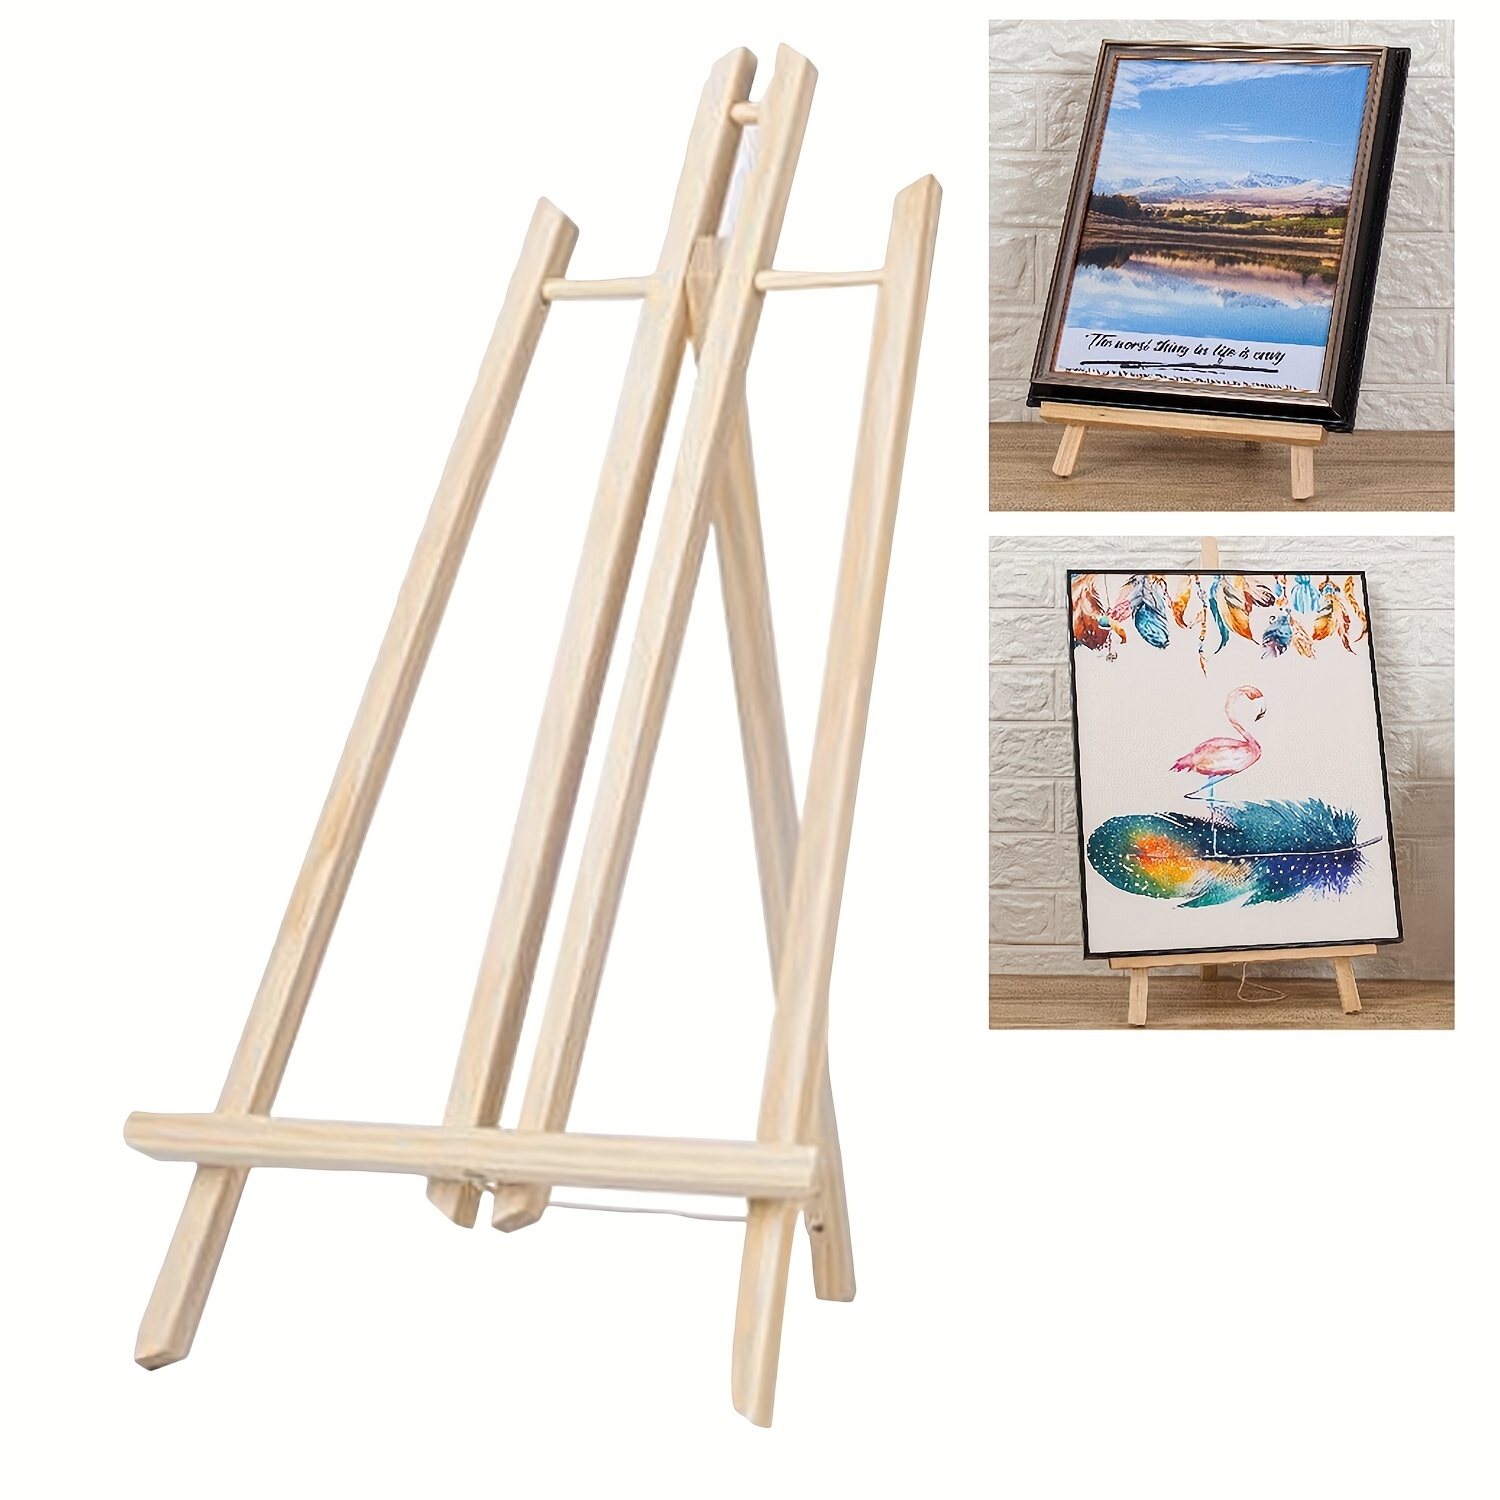 Acrylic Painting Set With Easel And Canvas 25pcs